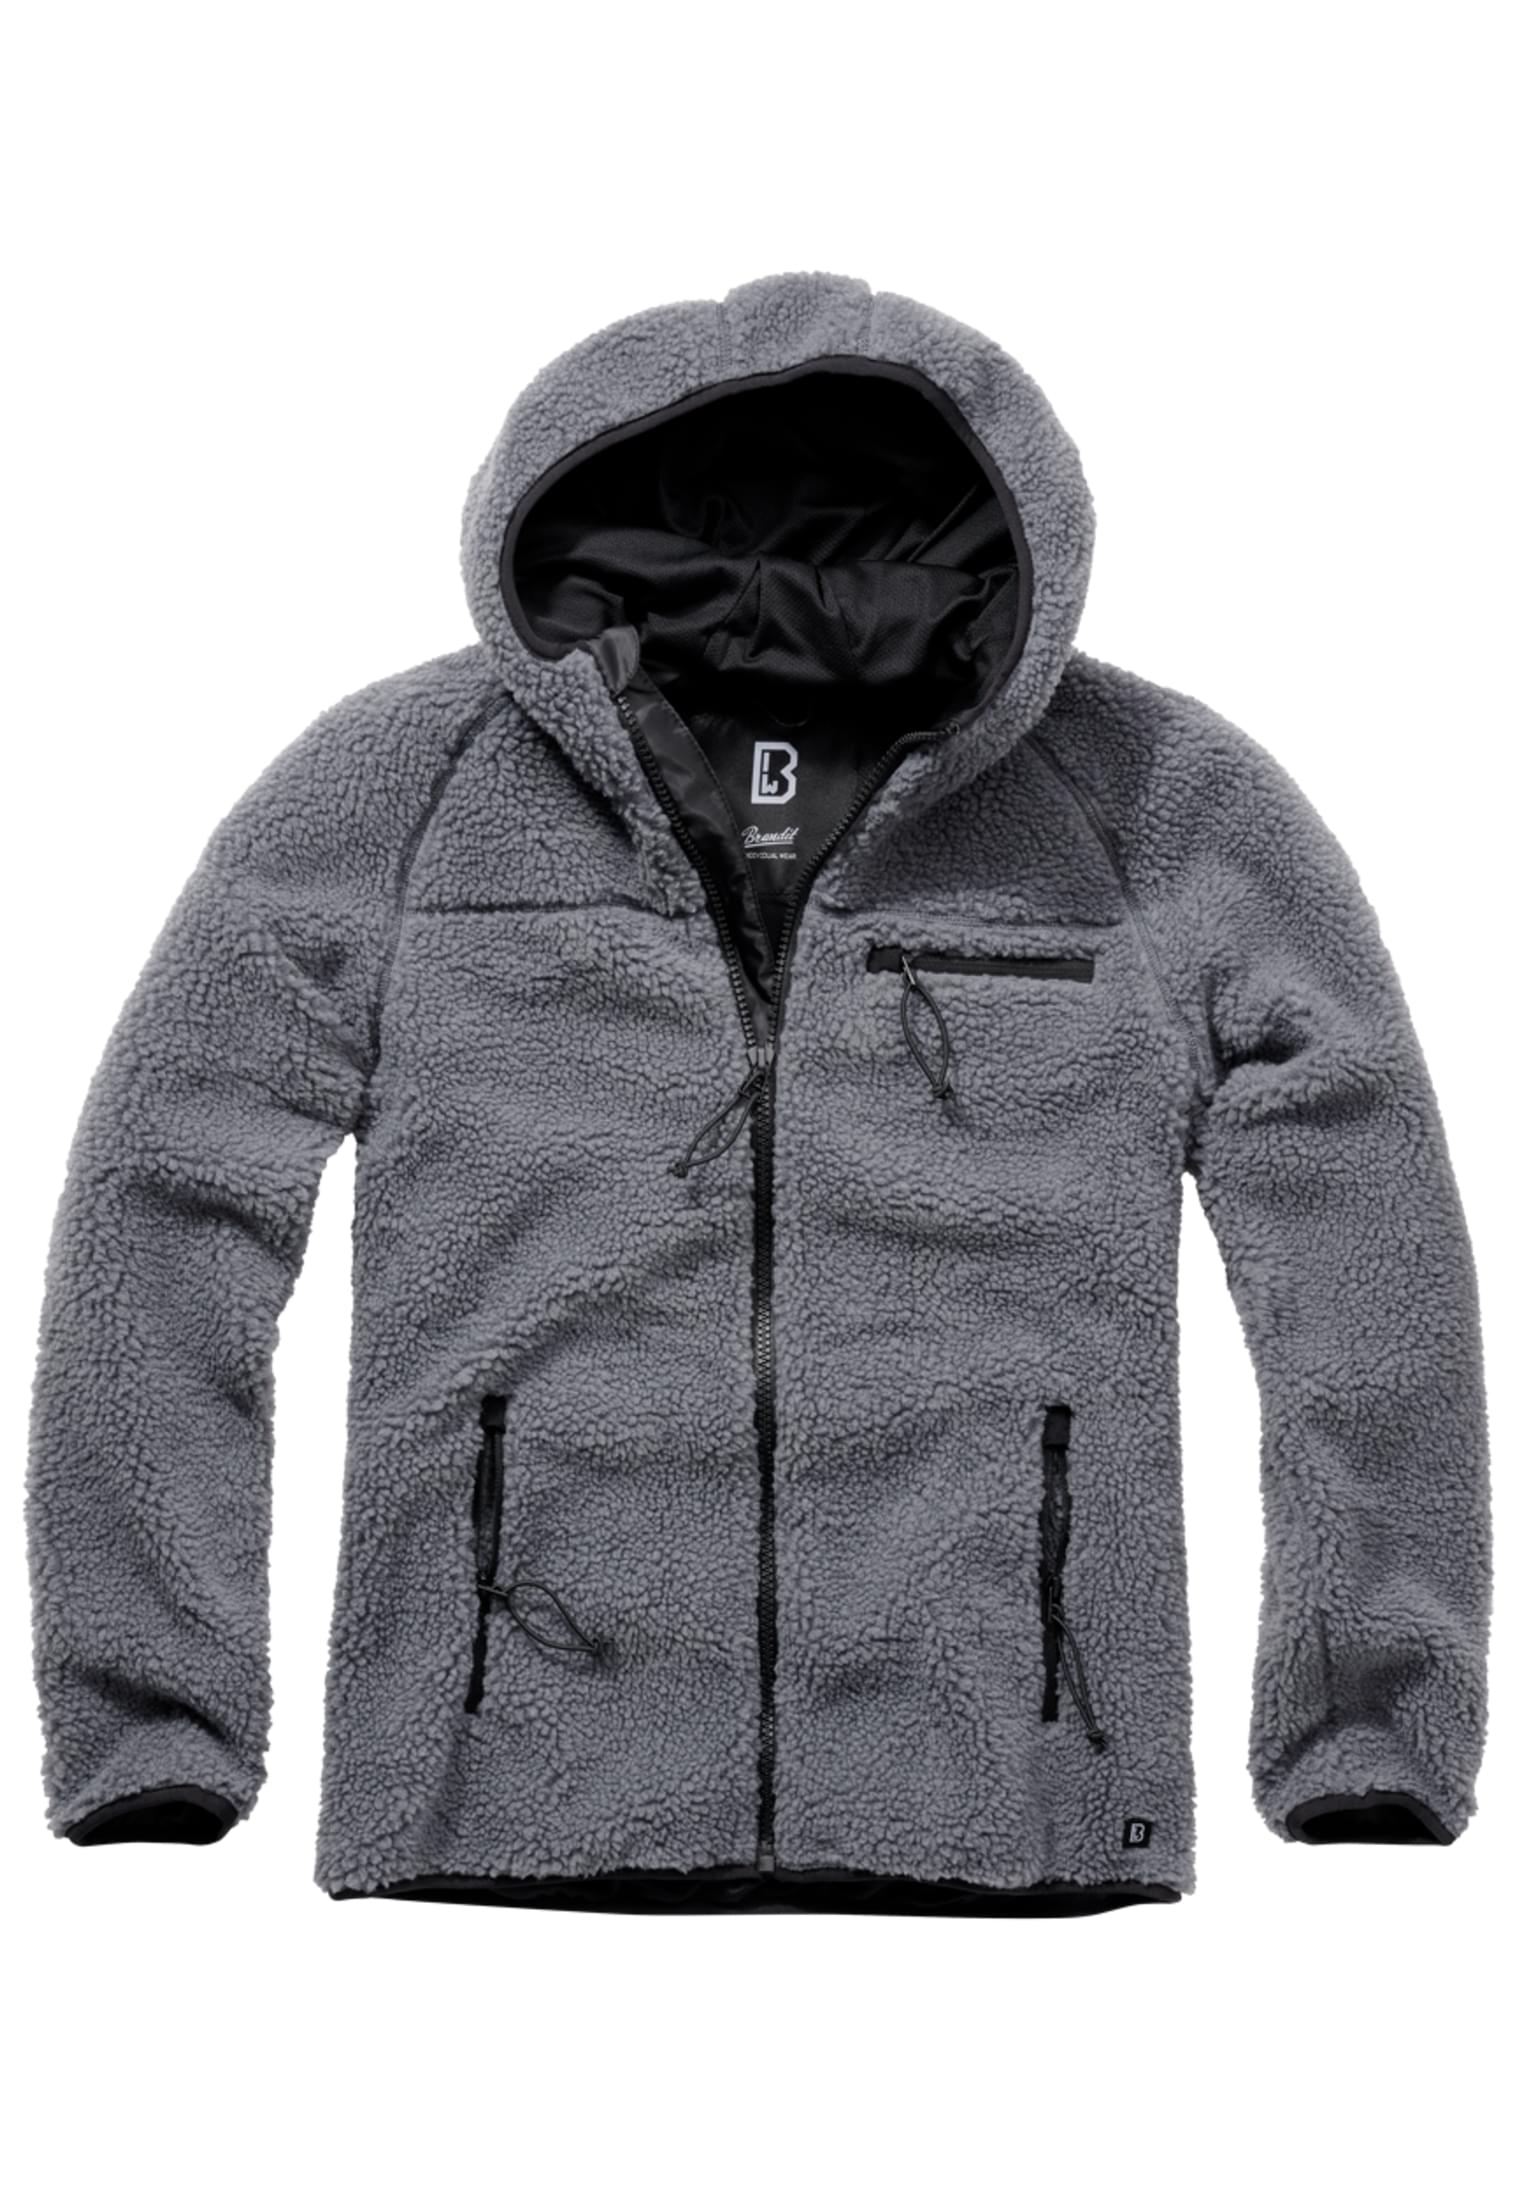 Pullover Teddyfleece Worker Jacket in Farbe anthracite